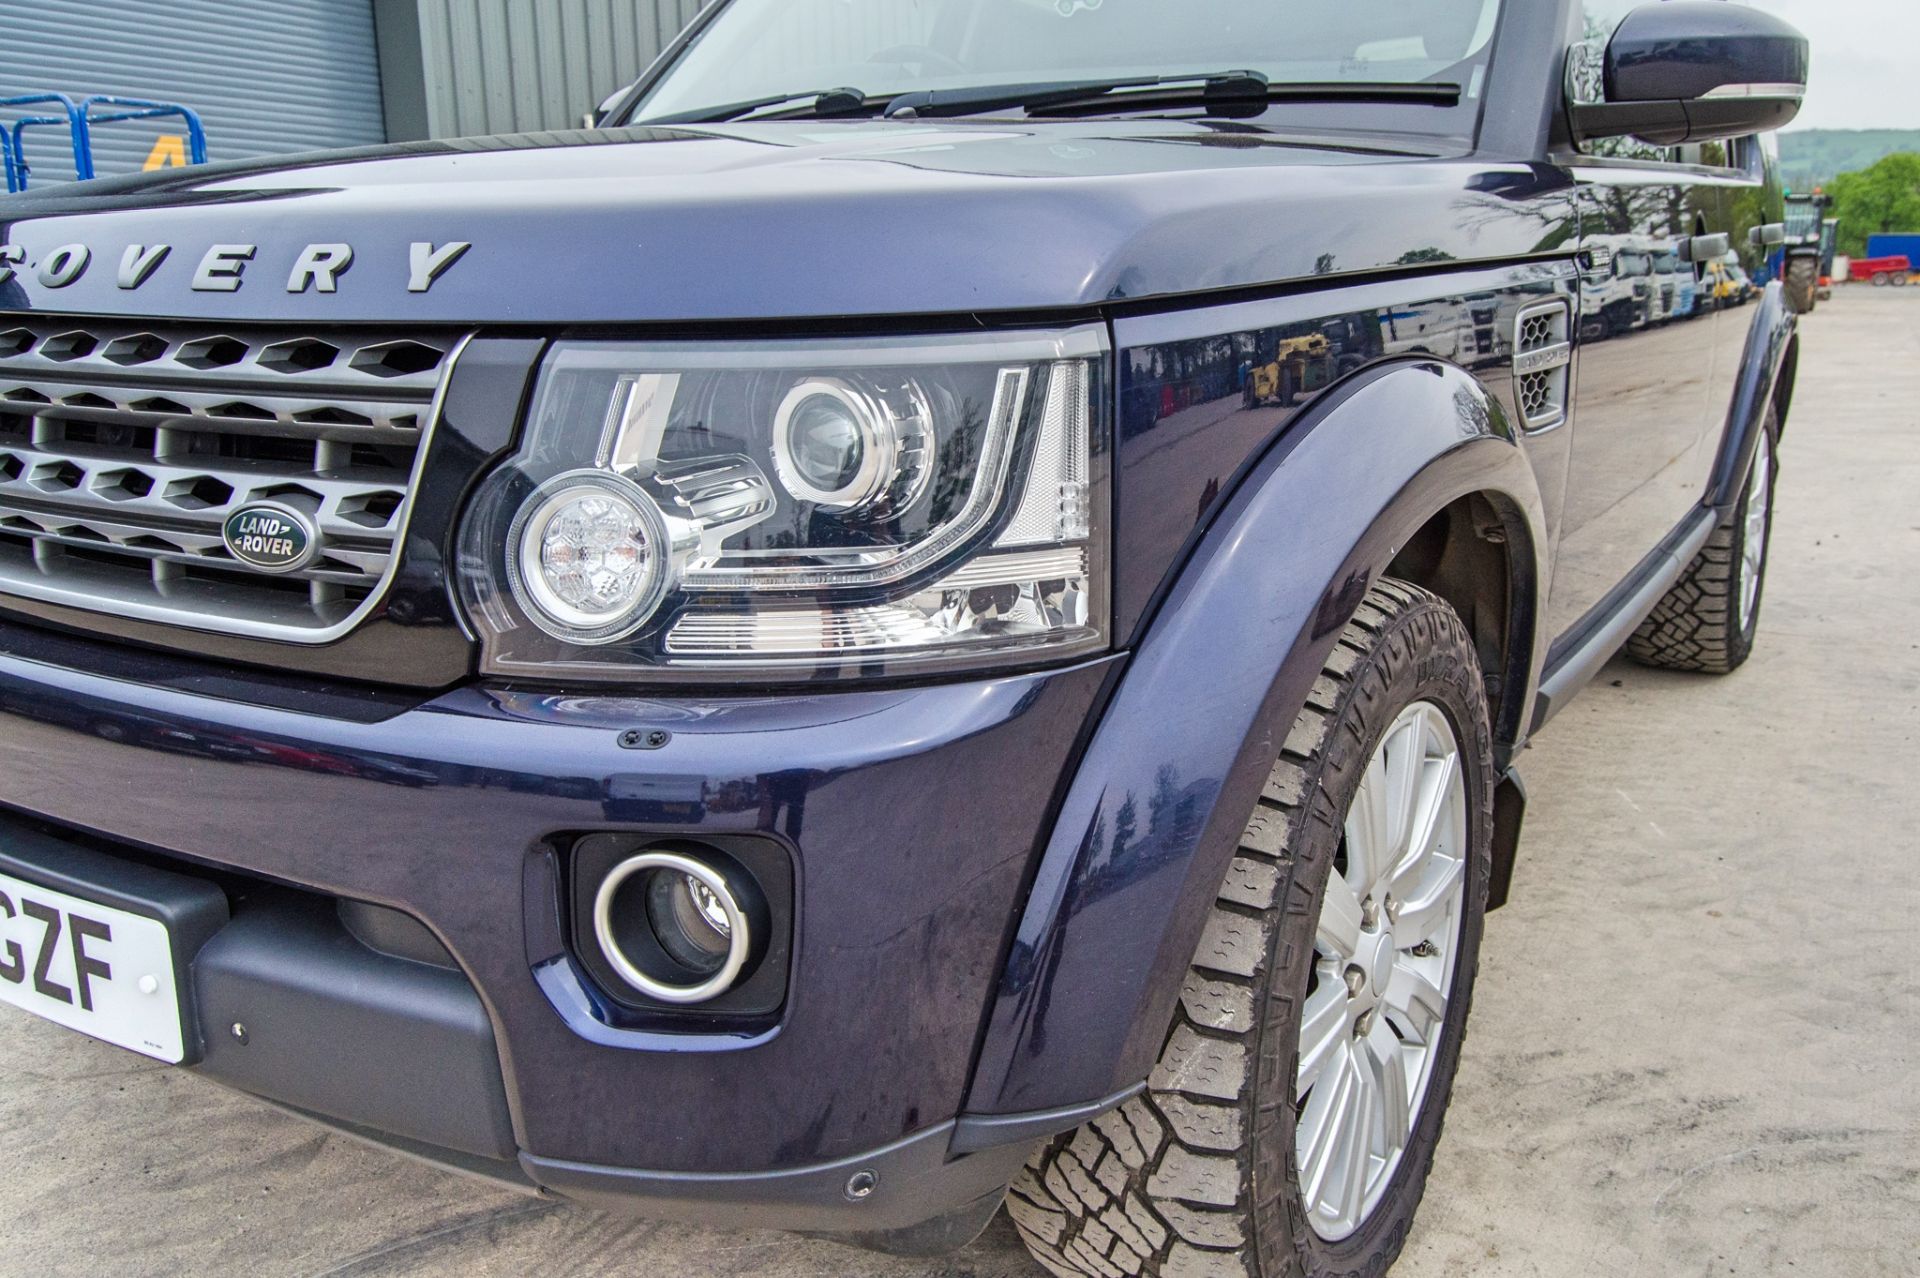 Land Rover Discovery 4 3.0 SDV6 SE Commercial auto 4 wheel drive utility vehicle  Registration - Image 10 of 39